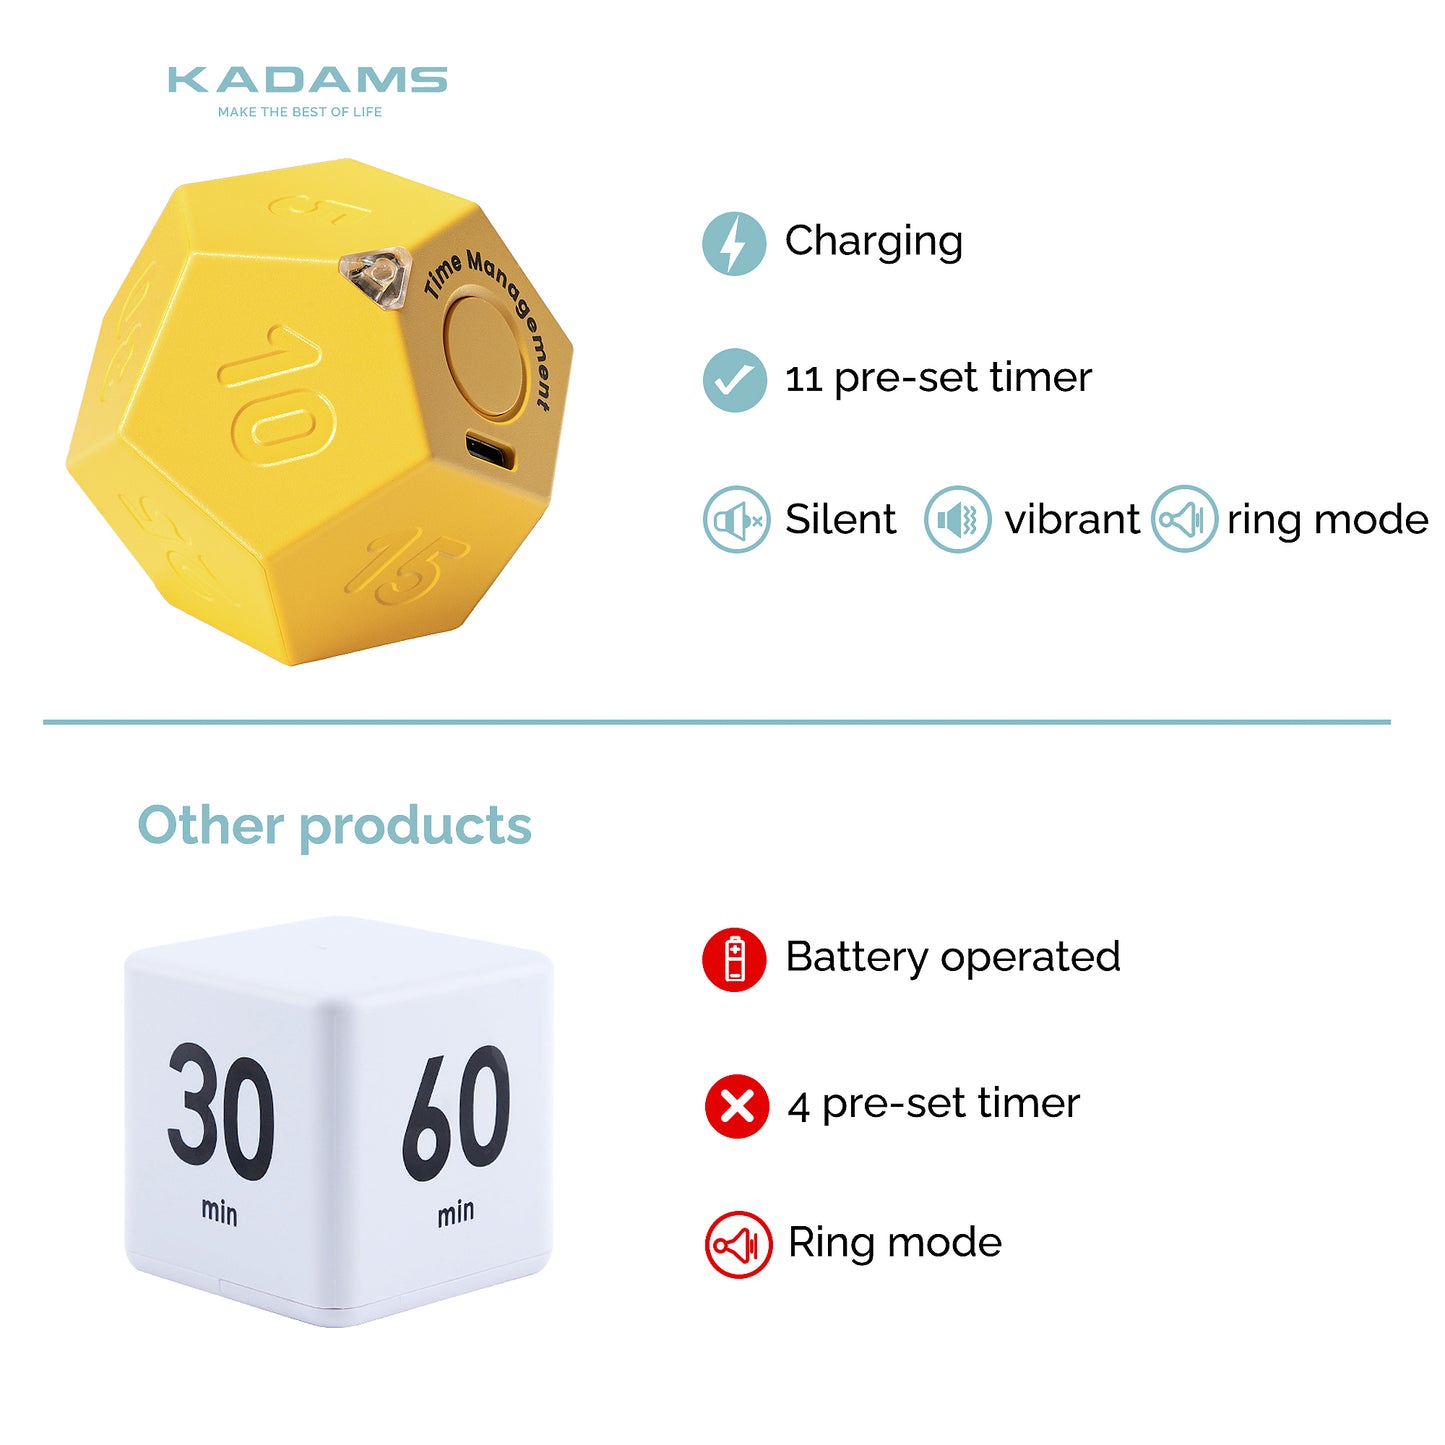 KADAMS Cube Timer Rotating Productivity Timer - Rechargeable Desk Timer Dodecagon with Sound Vibrate Light Alarm Flip Timer for Time Management Kids ADHD 1 3 5 10 15 20 25 30 45 60 90 Minute Countdown